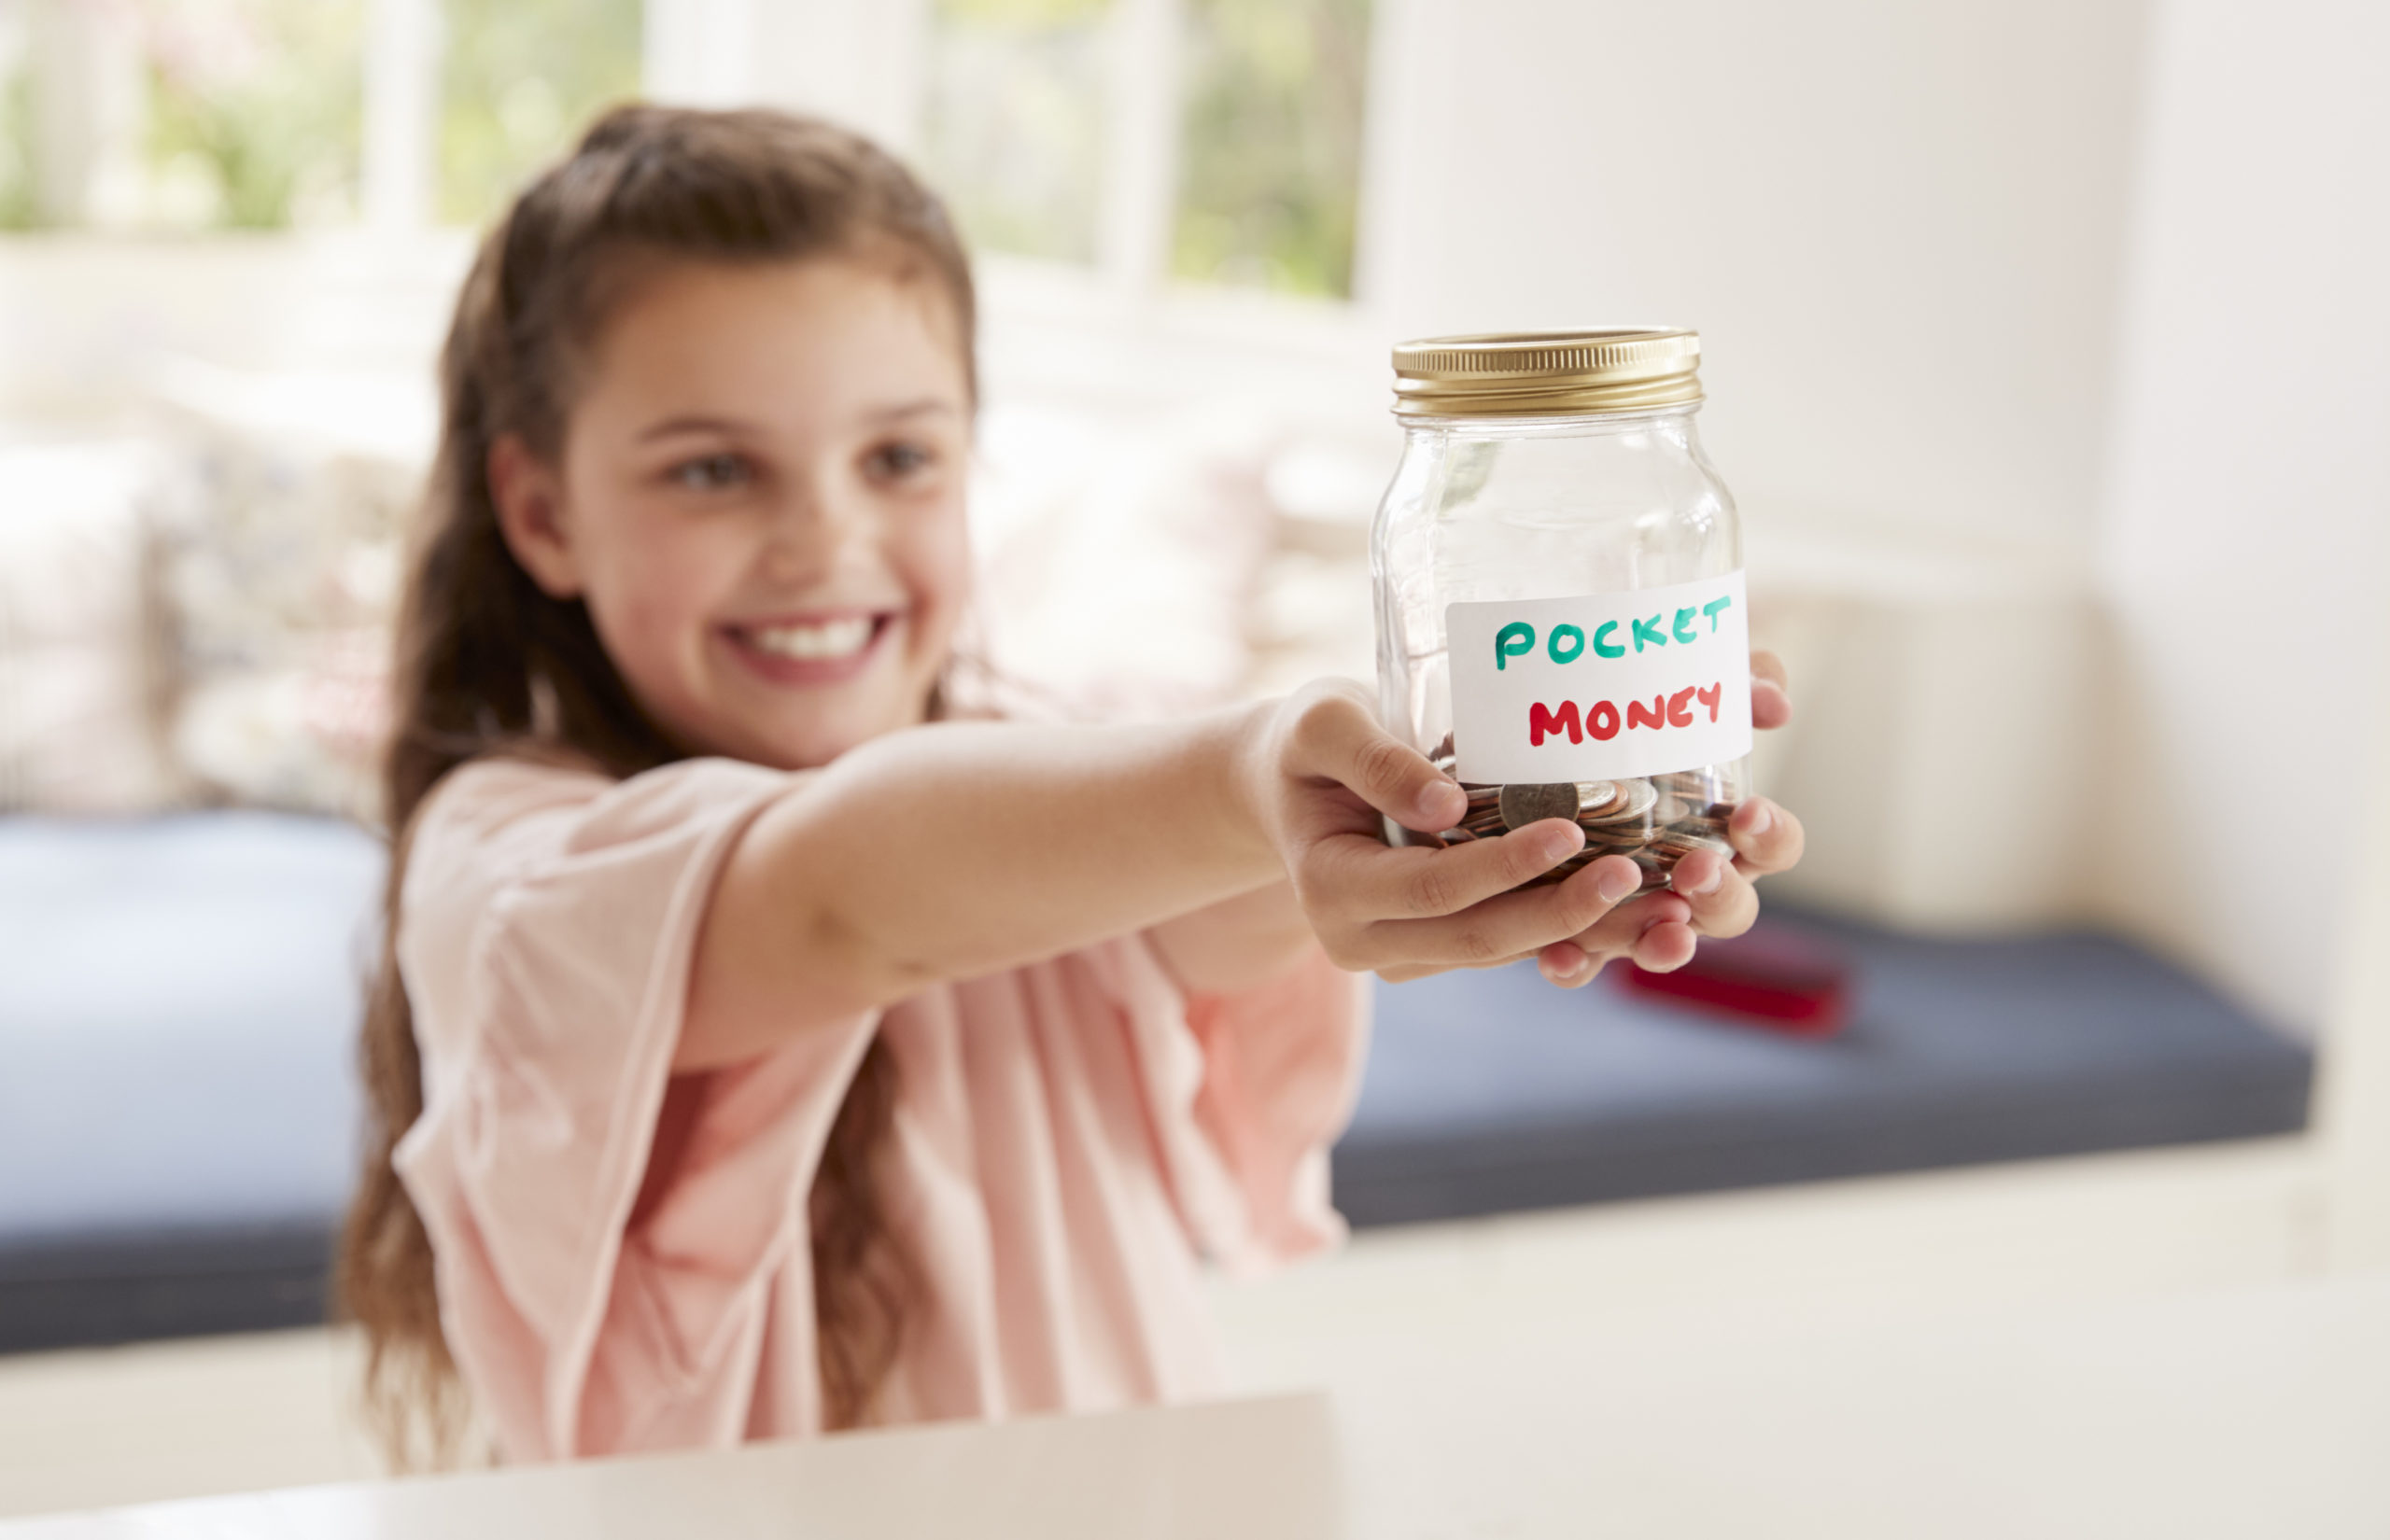 How to Teach Your Children Good Financial Literacy Skills